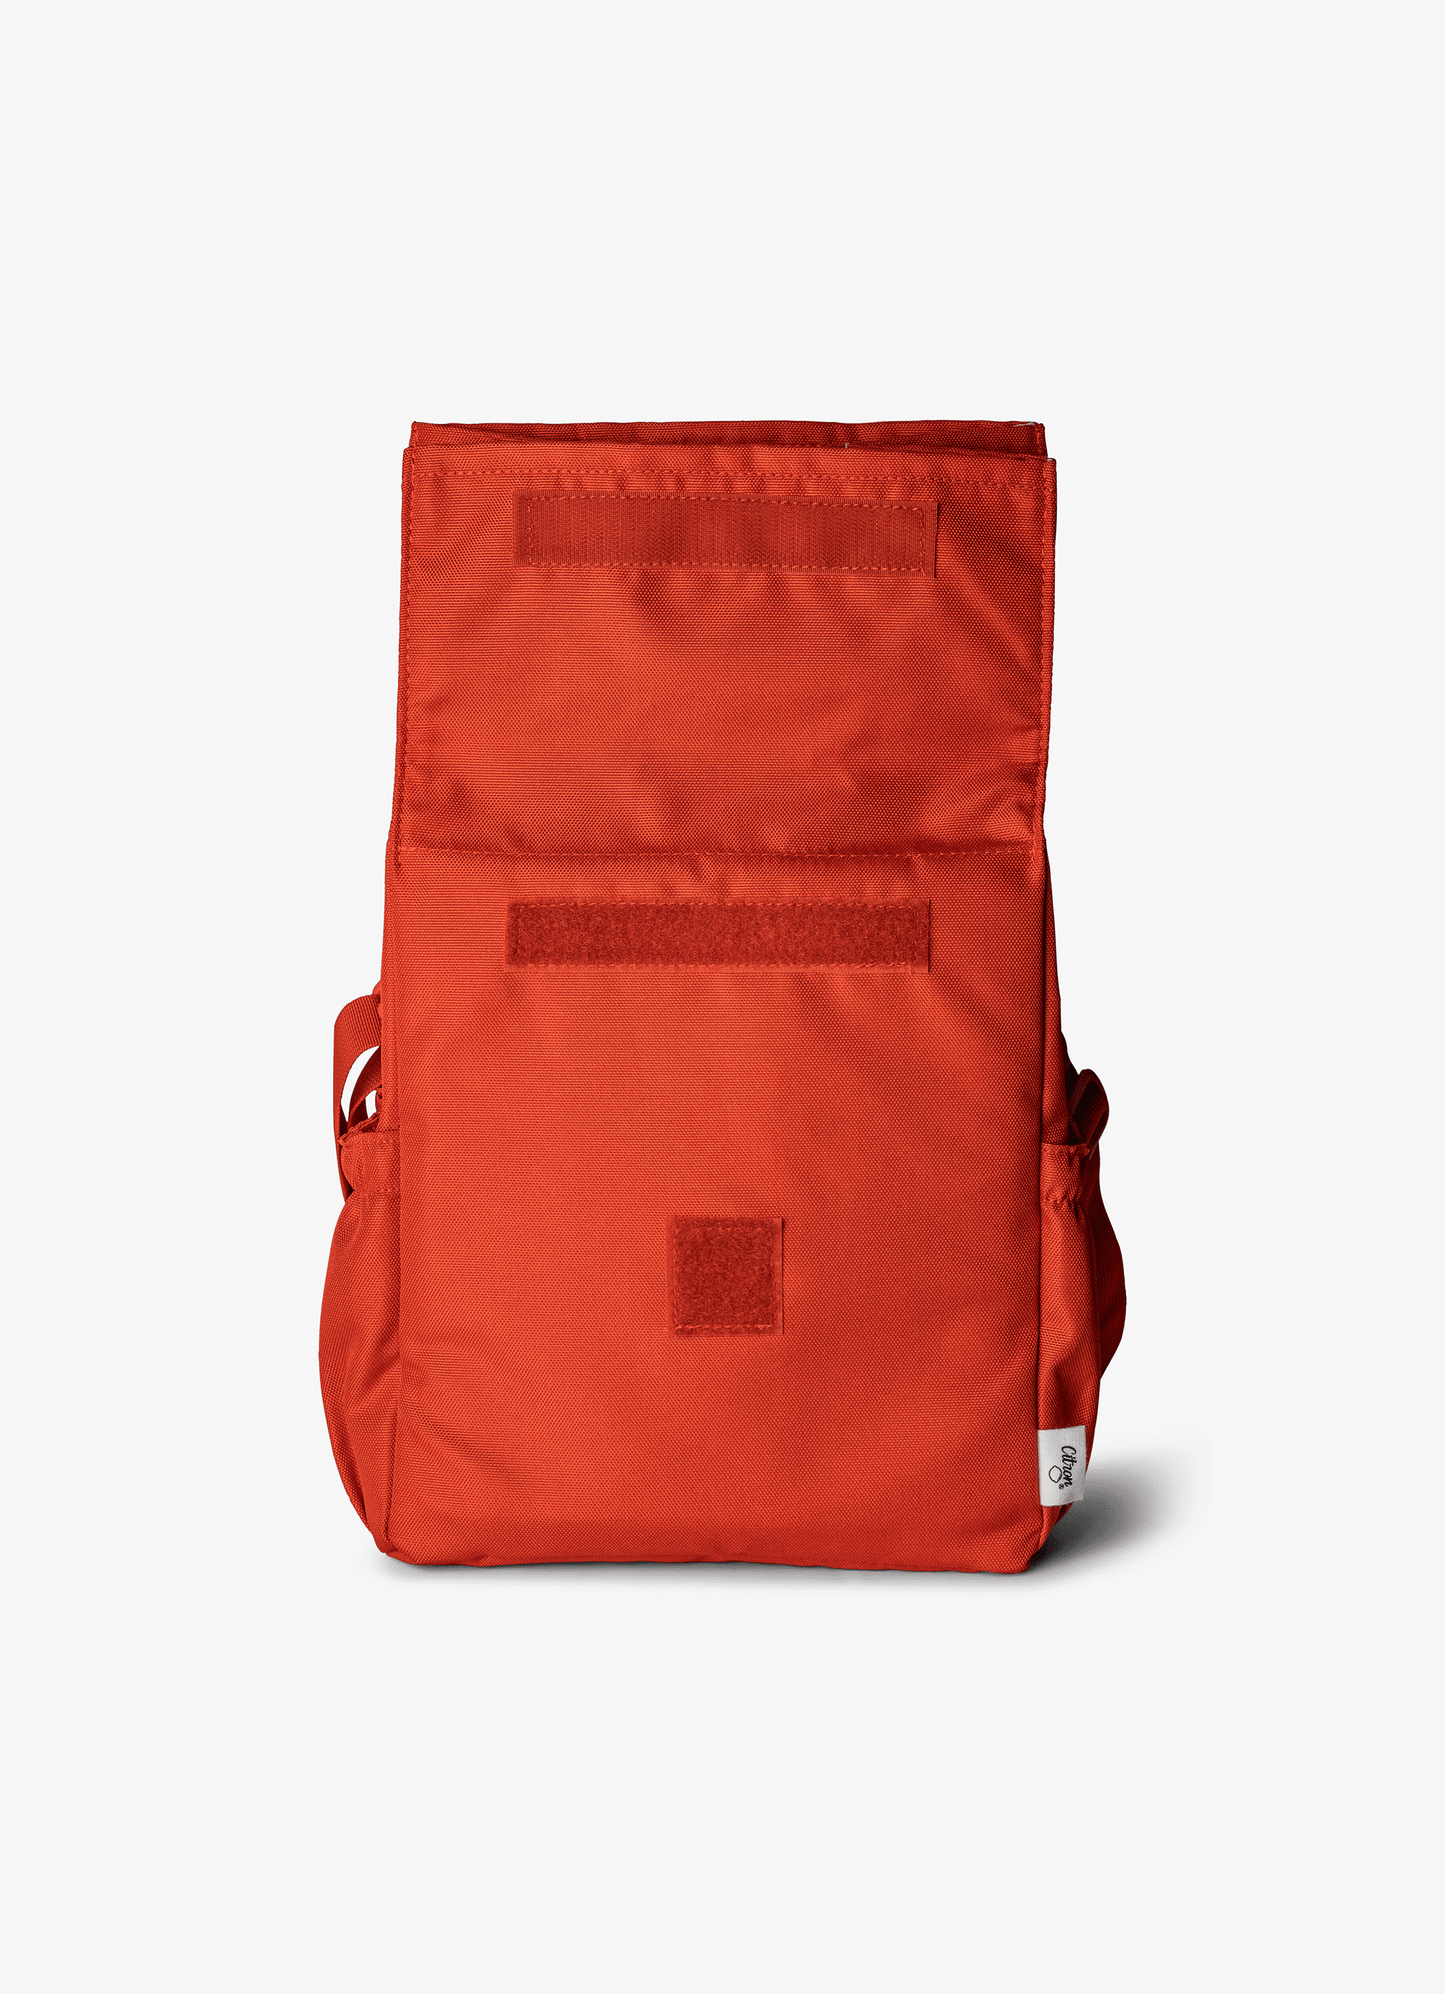 Thermal Roll-up Lunch Bag - Brick